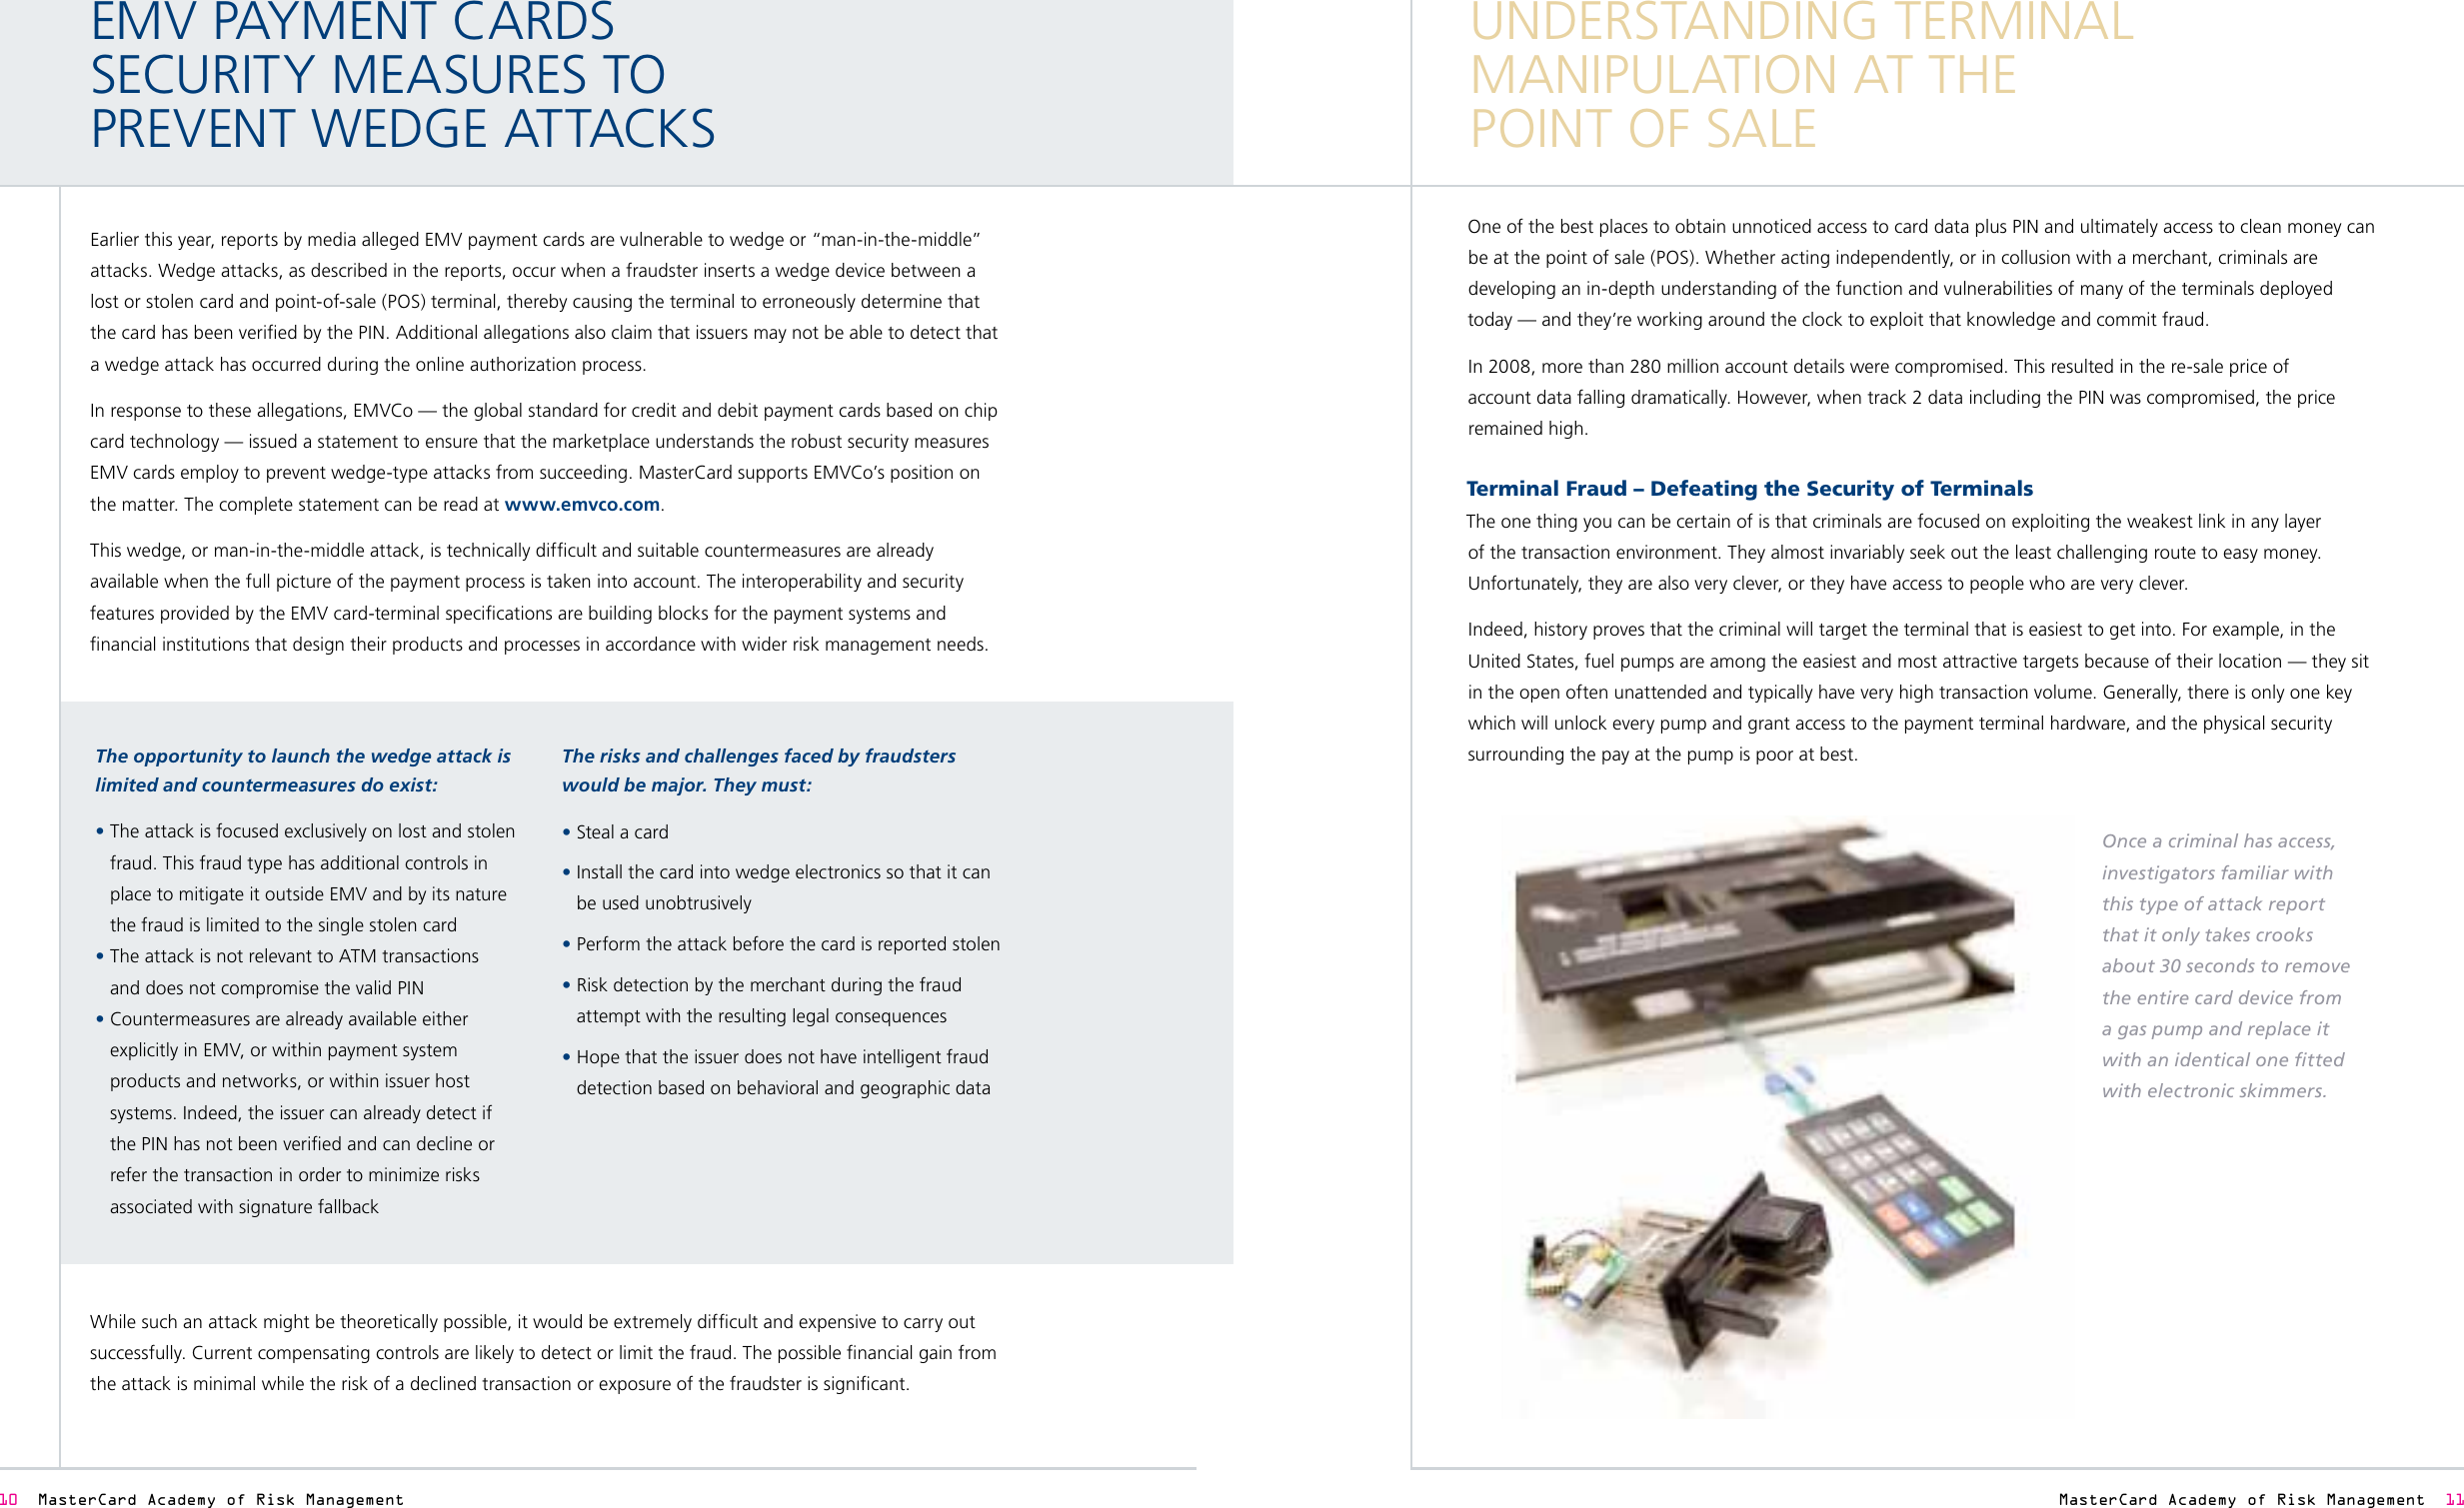 Page 4 of 4 - Managing Fraud With EMV